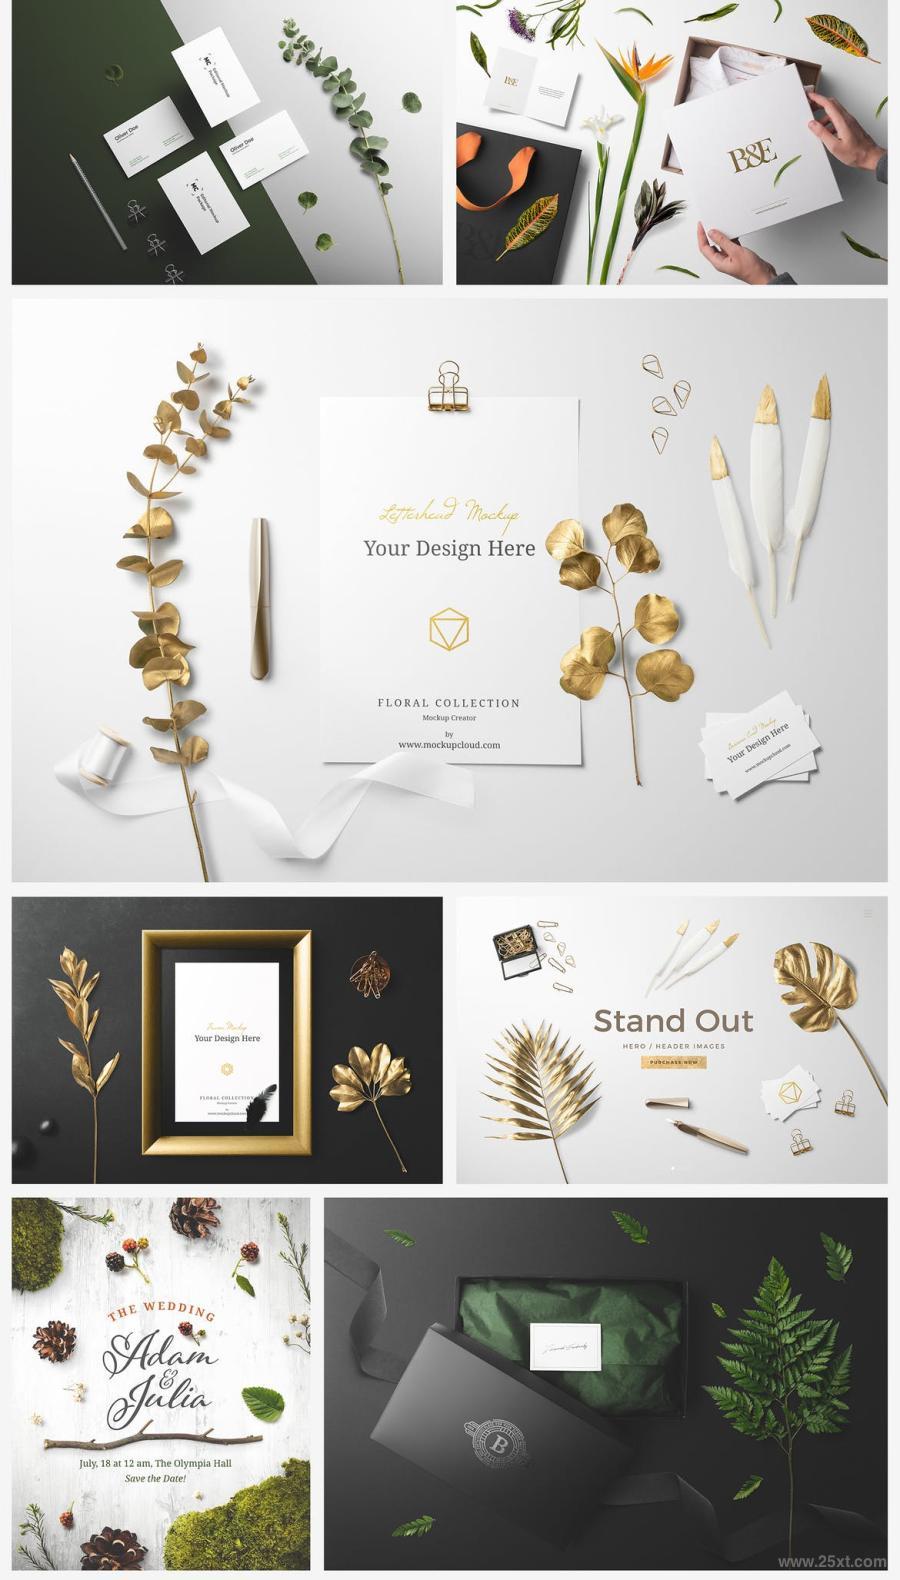 25xt-127309 Floral-Mockups-Collectionz9.jpg